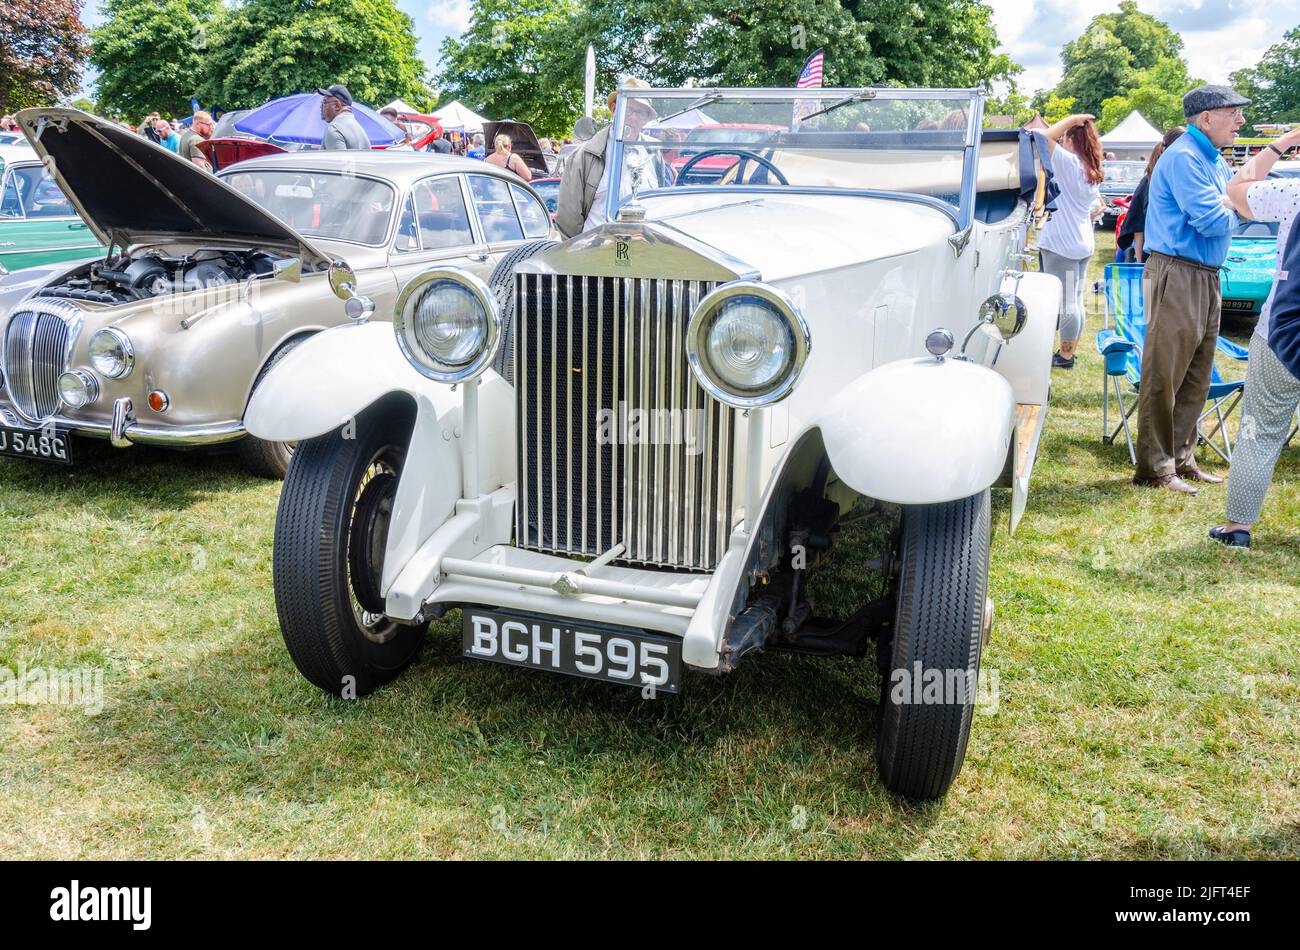 Front view of a vintage white 20/25 Rolls Royce in immaculate condition at The Berkshire Motor Show in Reading, UK Stock Photo